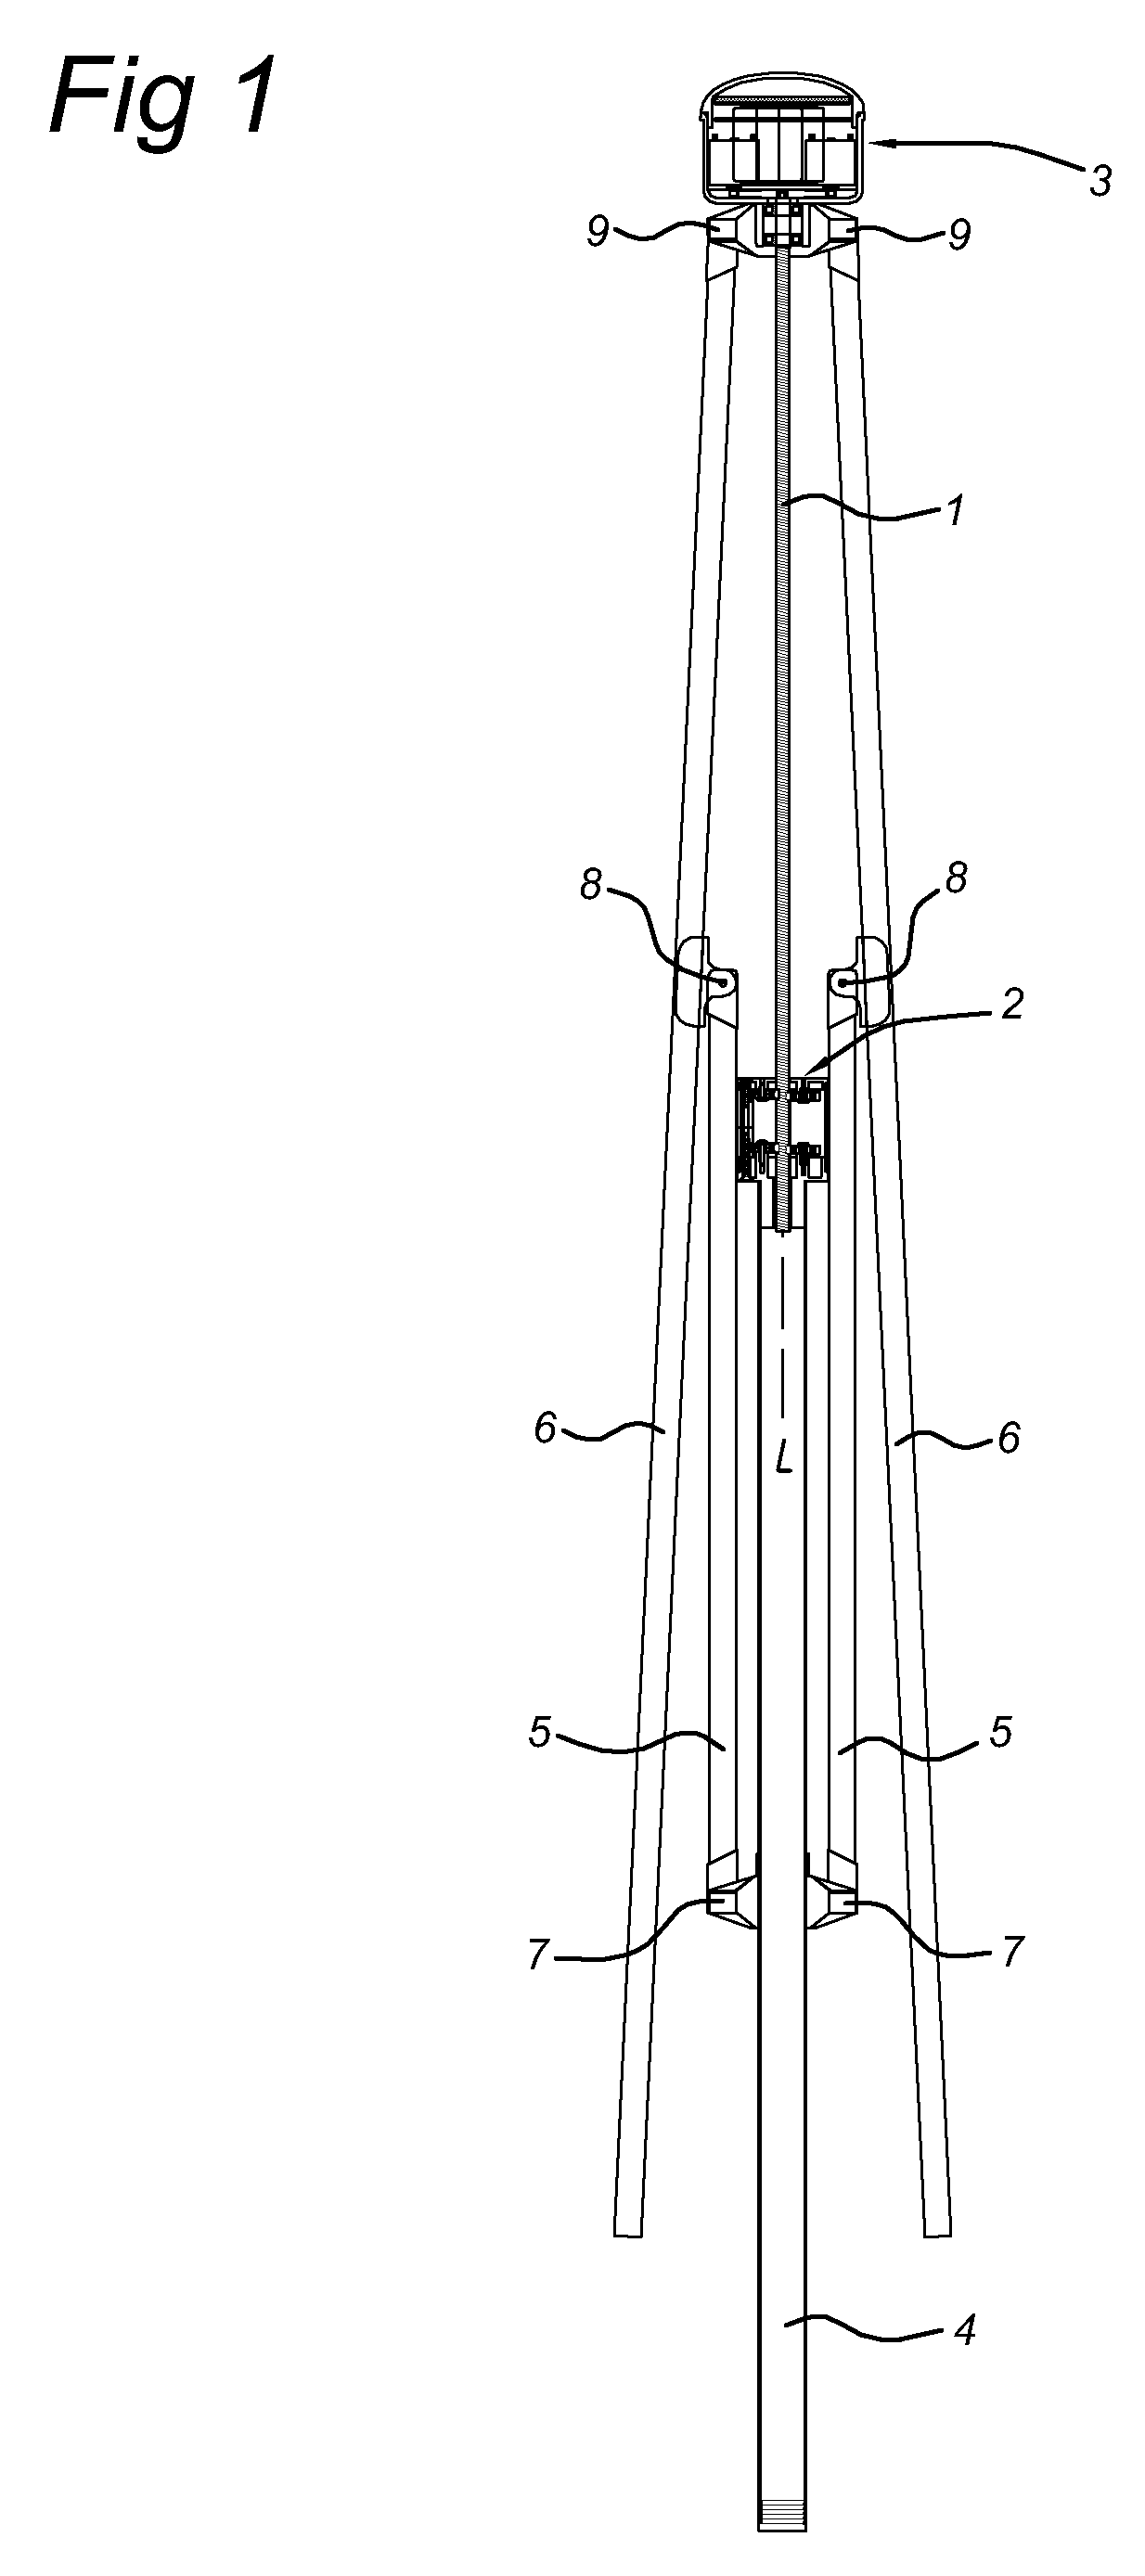 Assembly of a spindle and guide therefor